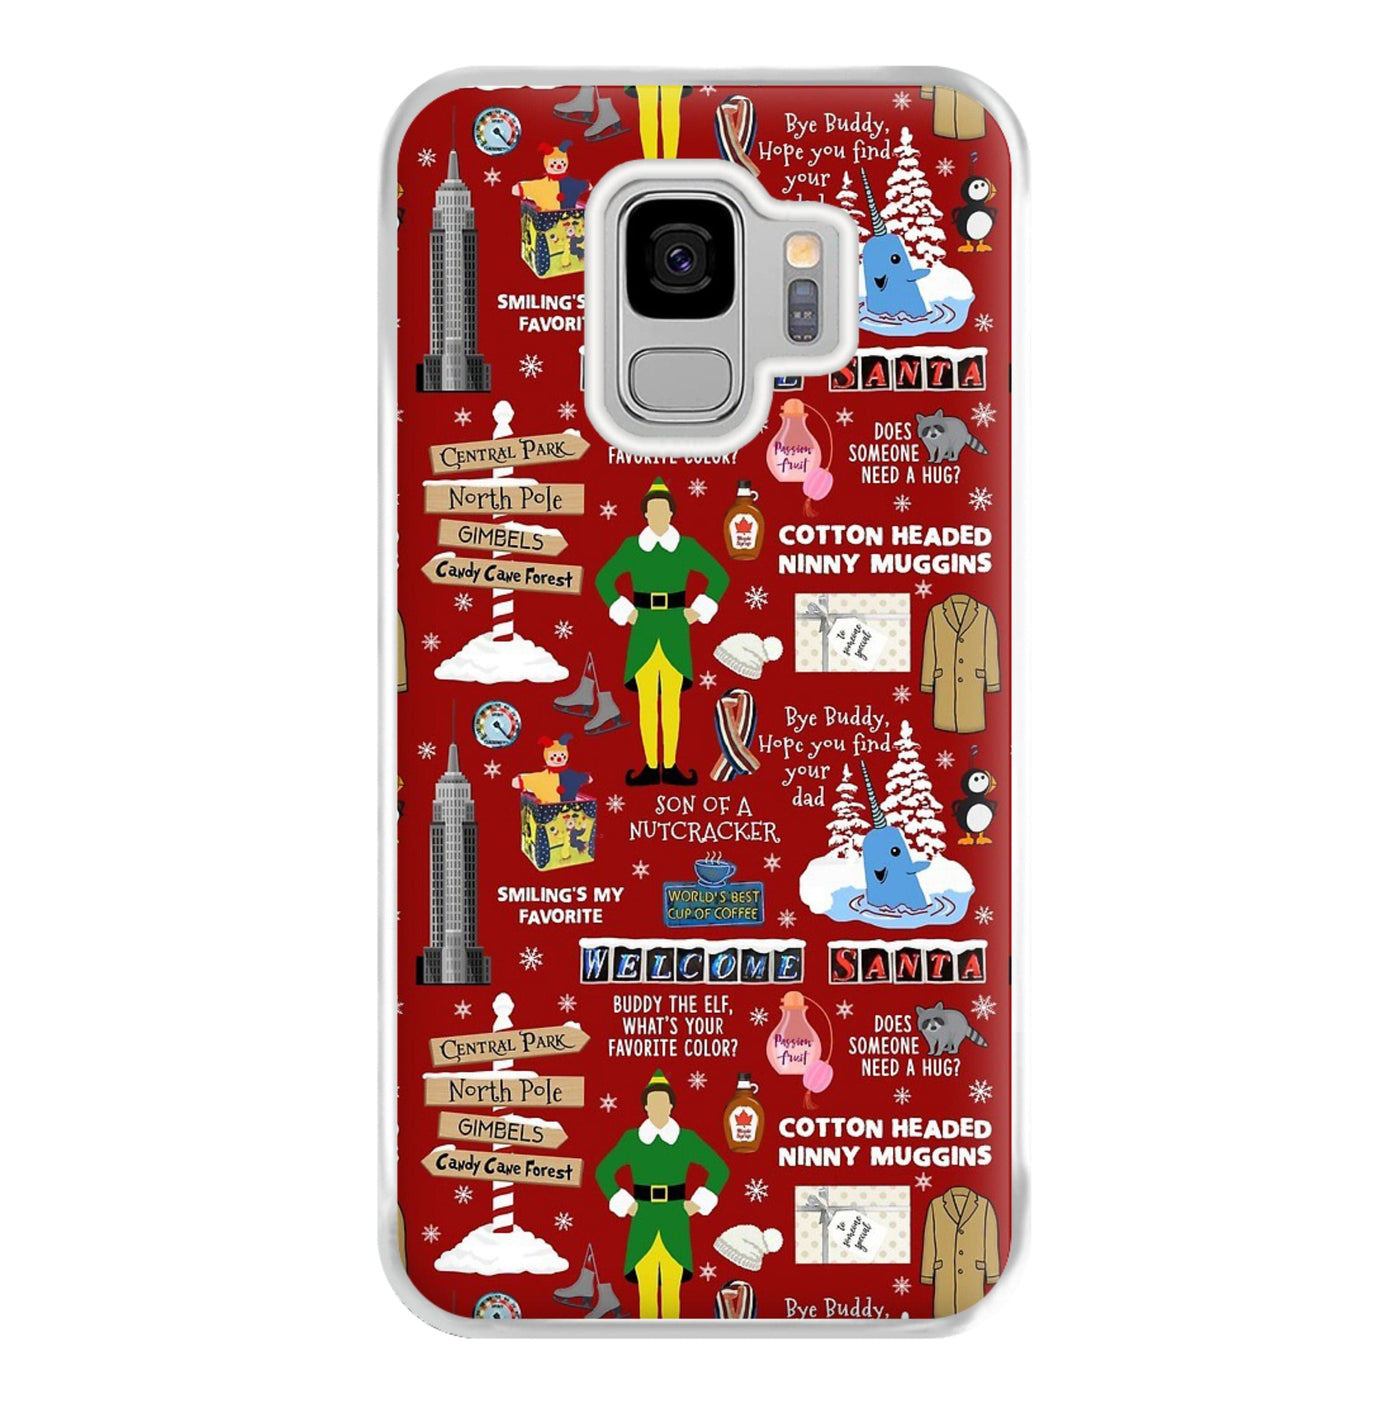 Red Buddy The Elf Pattern Phone Case